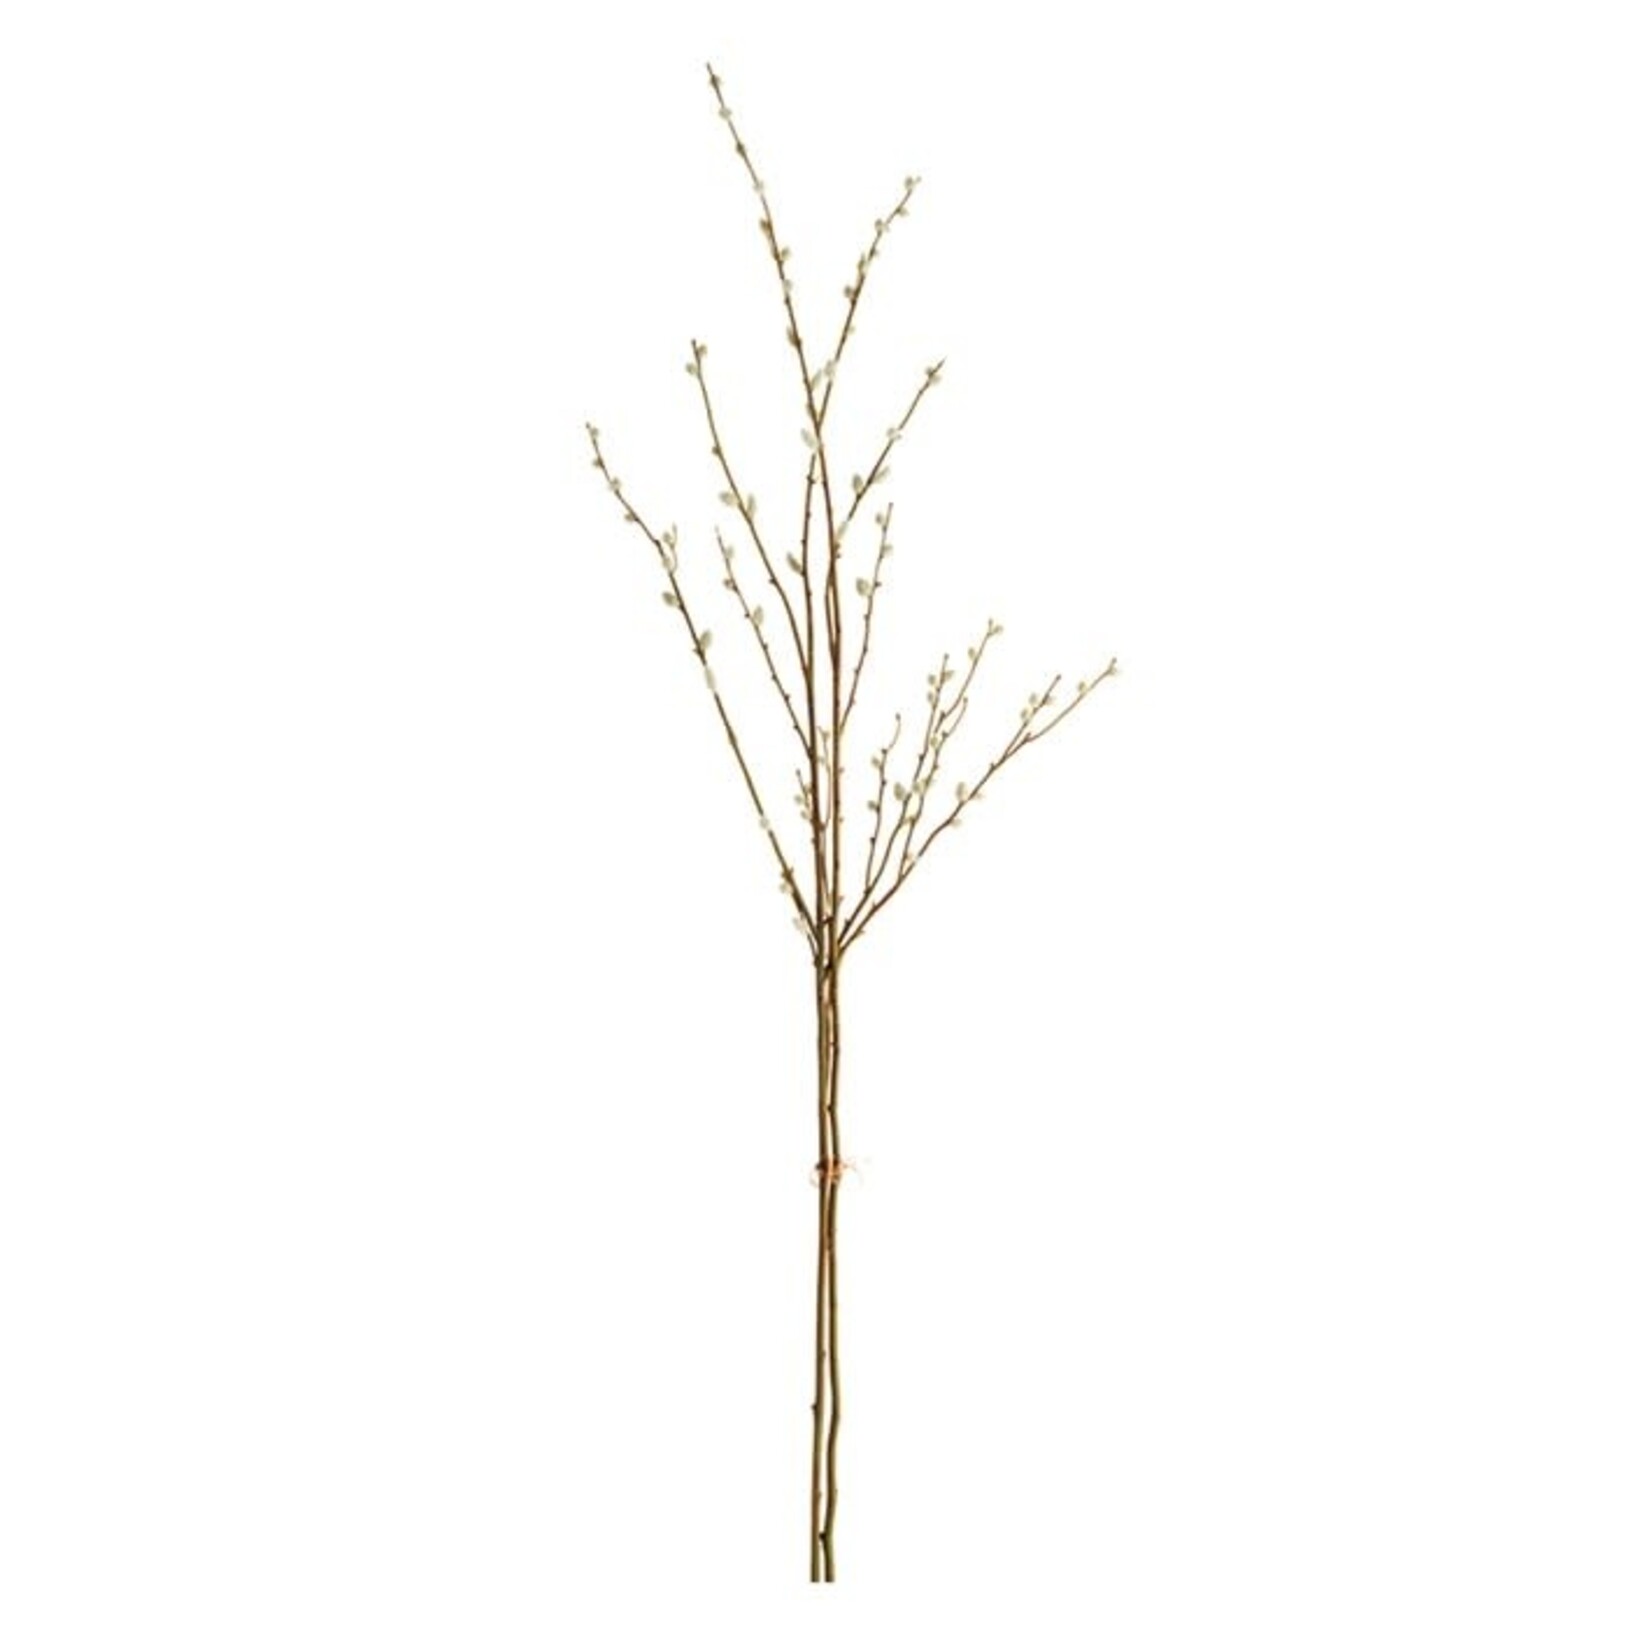 Napa Home and Garden Pussywillow Steams 52" Bundle of 2